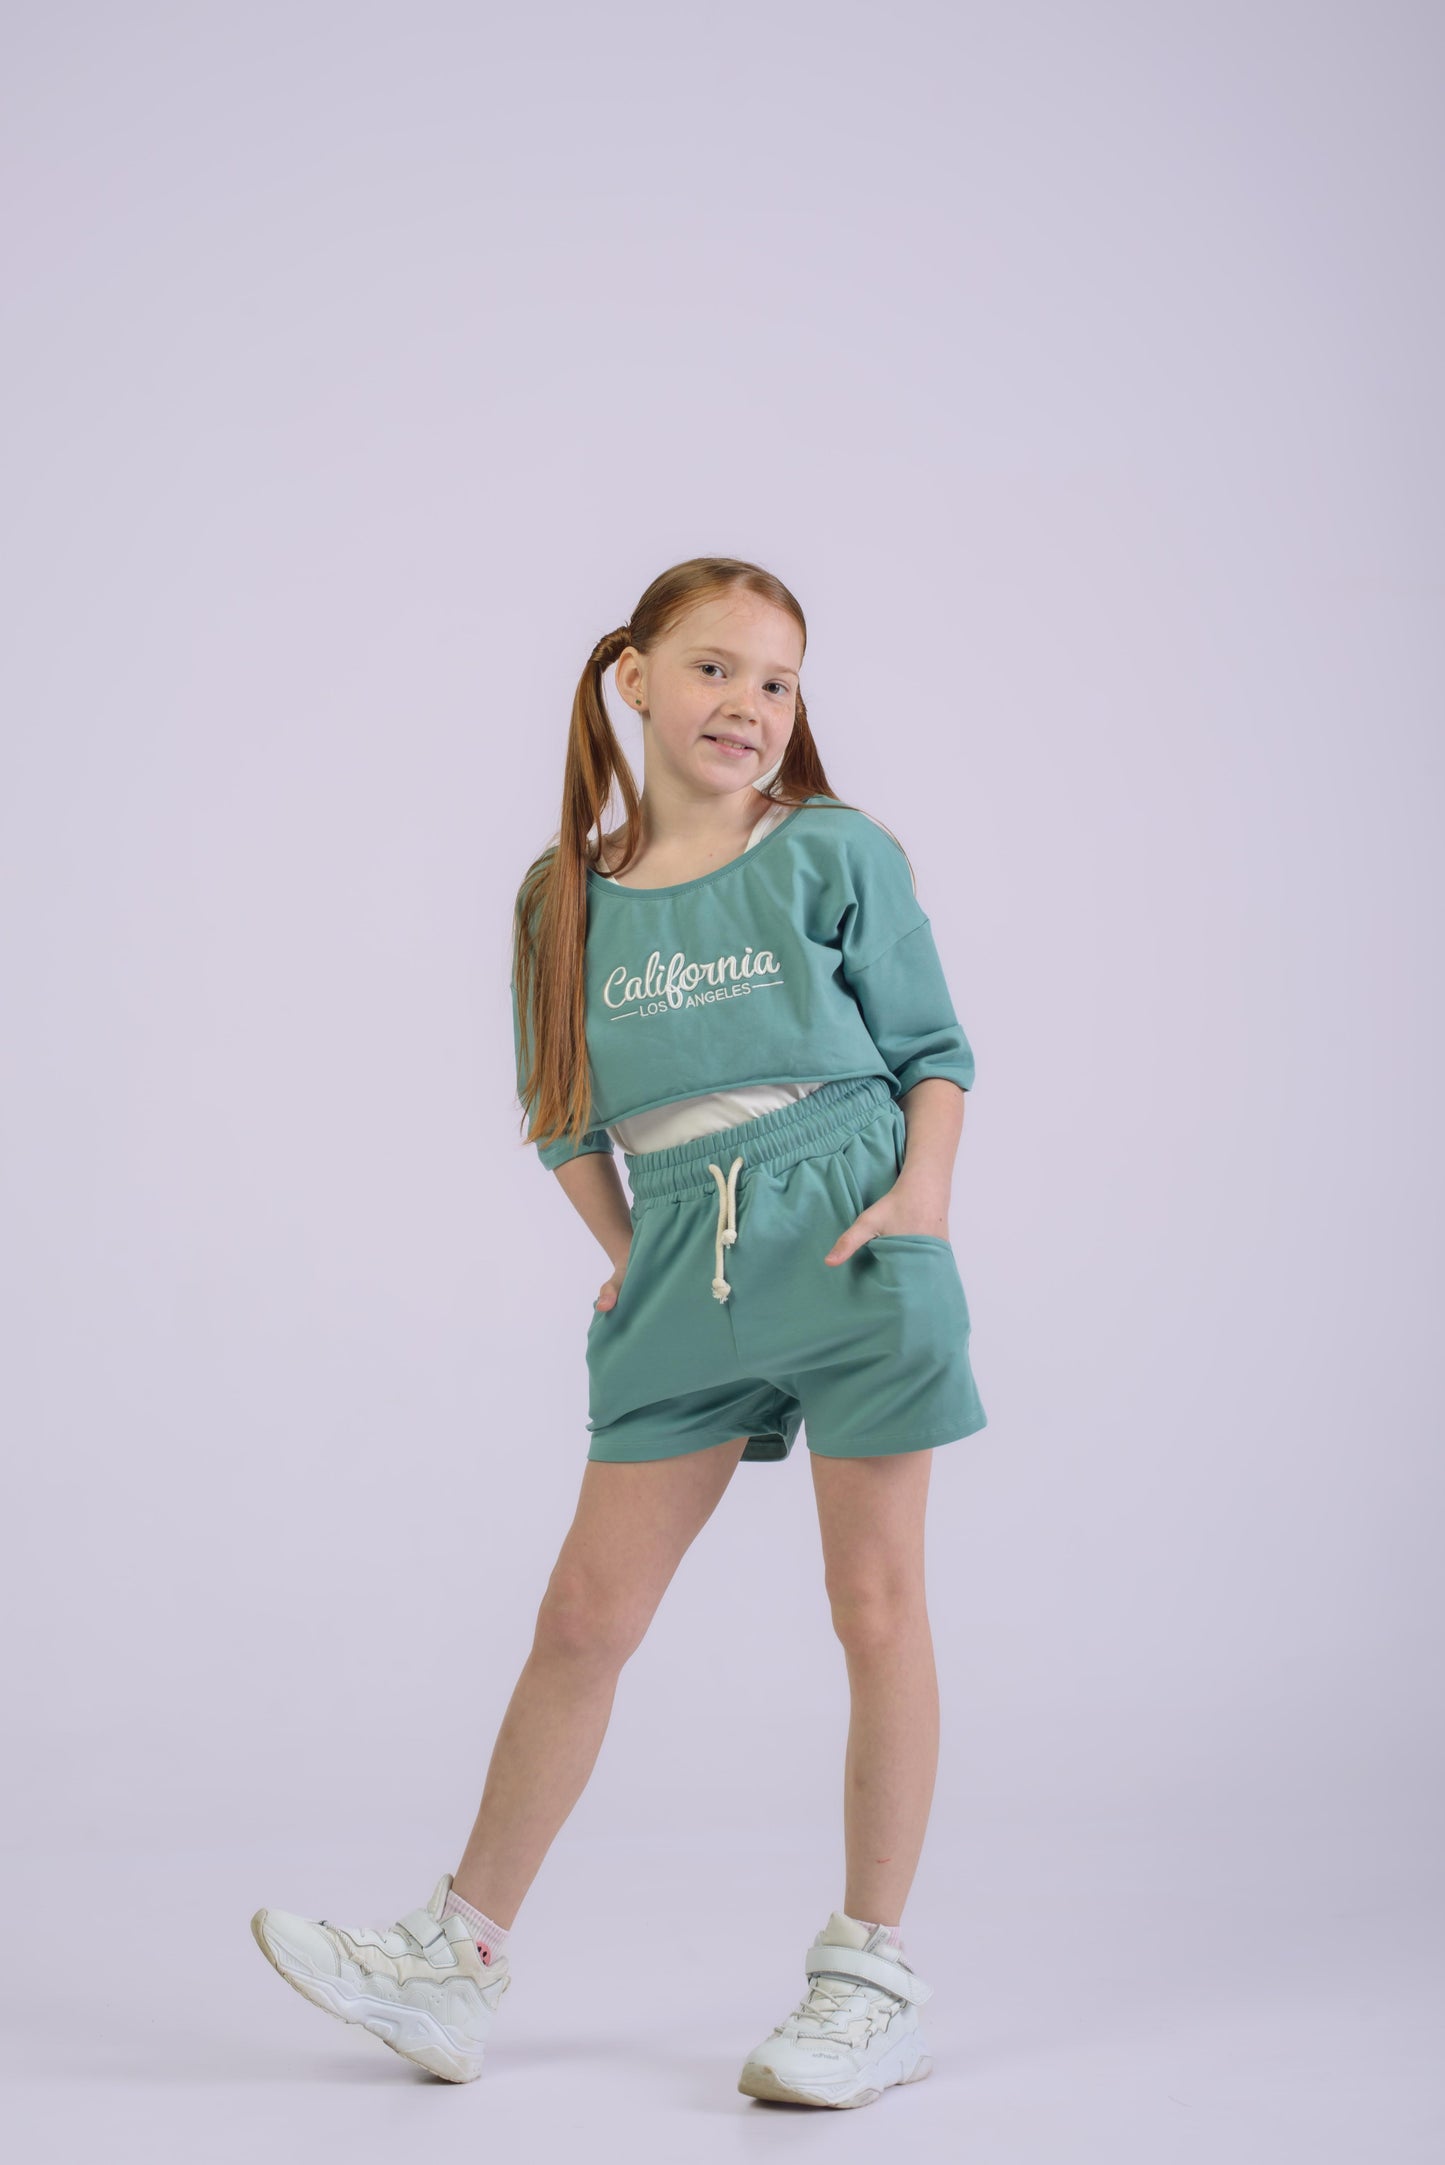 Young Girl's 100% Cotton 3-Piece Set with Embroidery Detailed Shorts